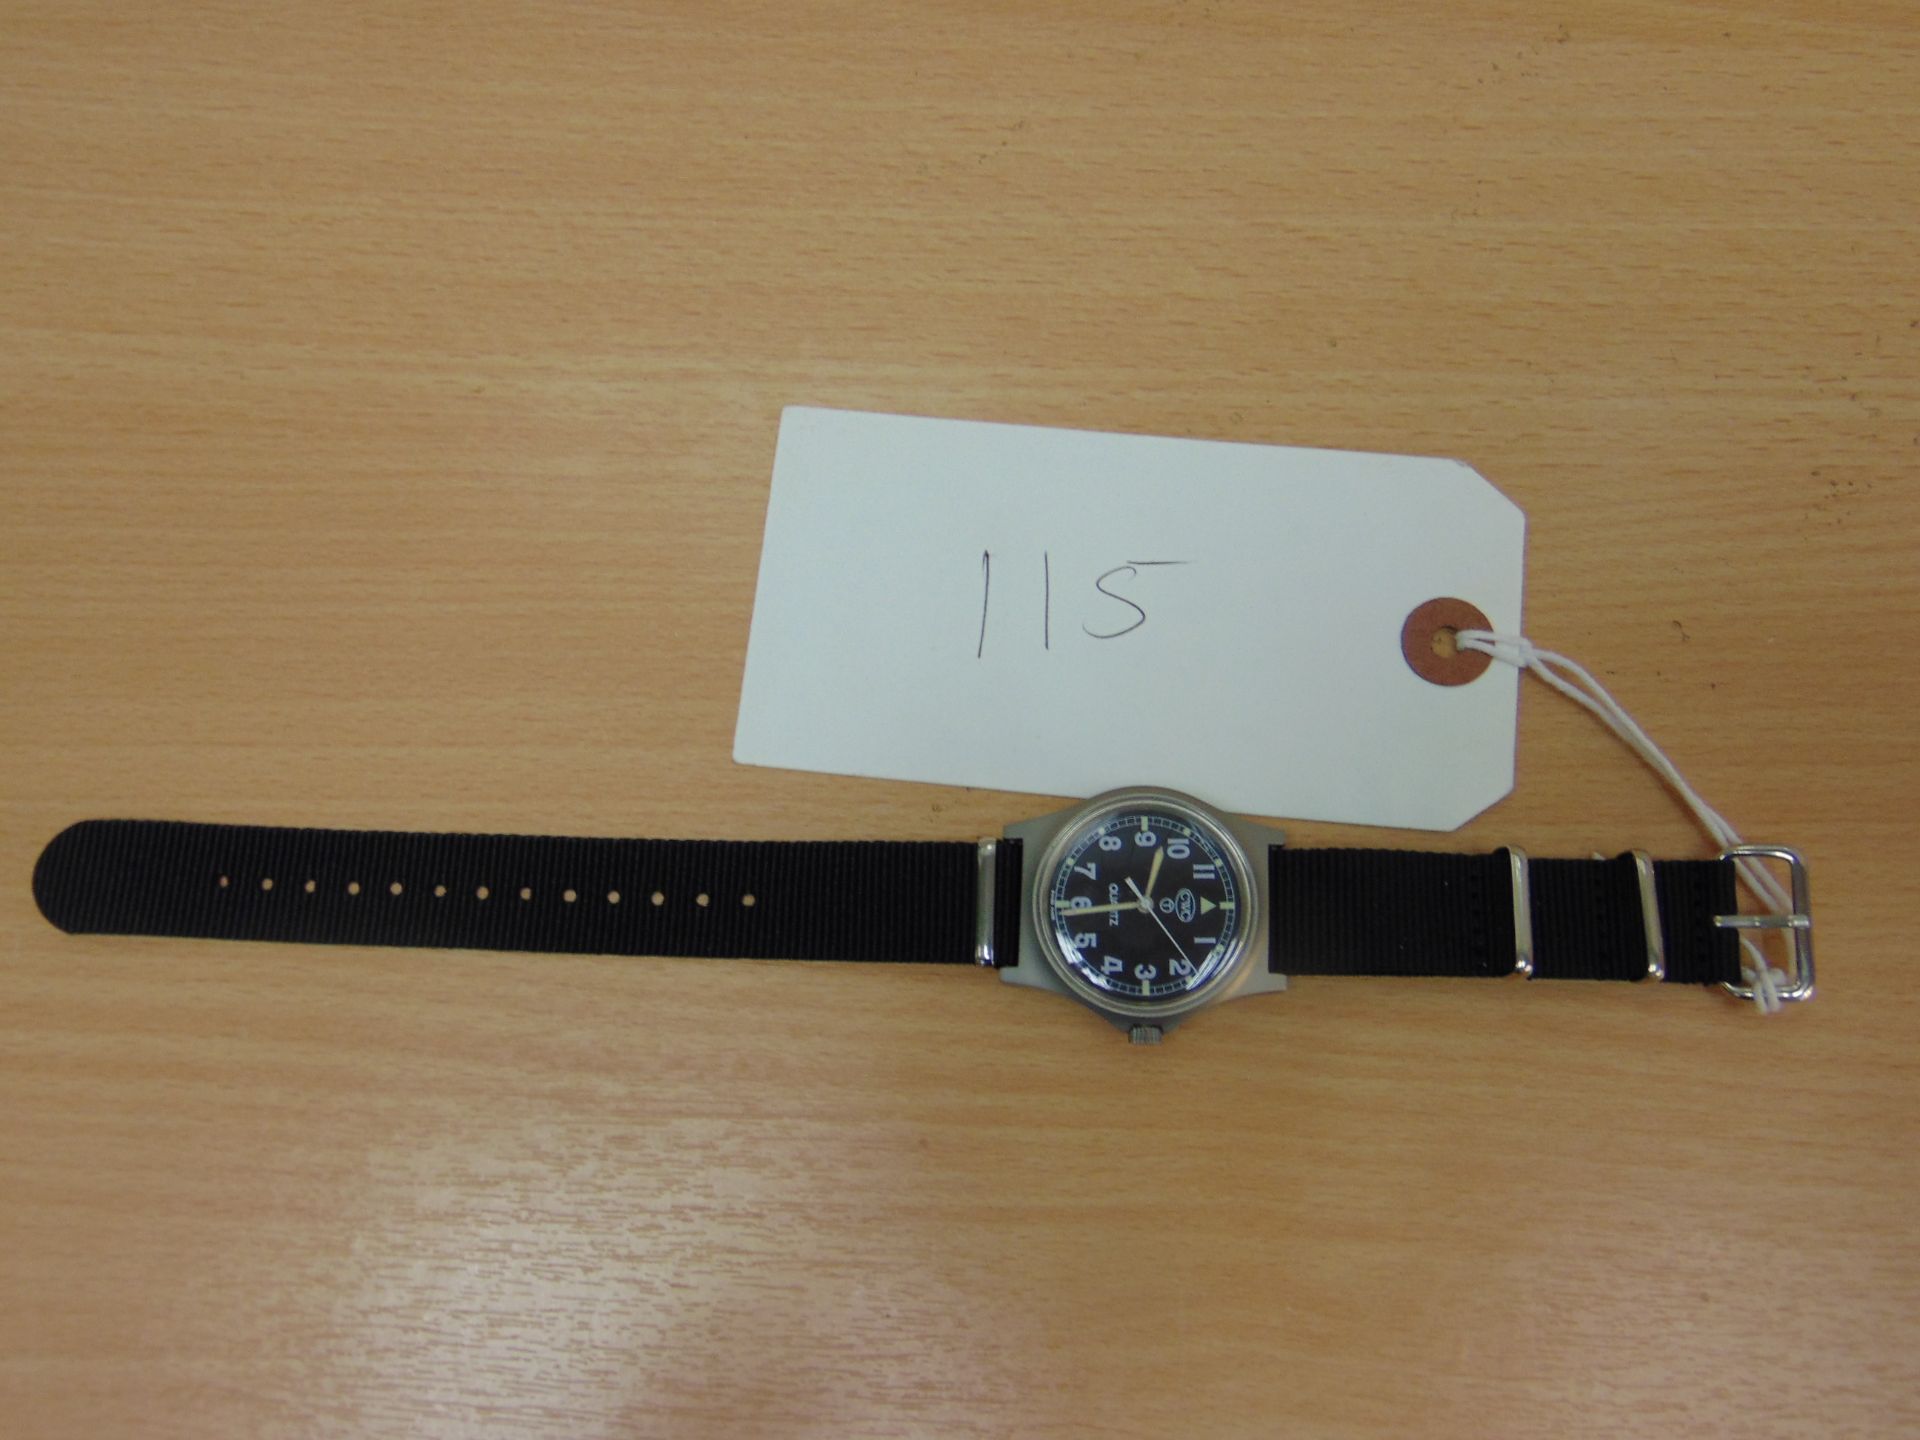 VERY RARE UNISSUED CWC 0552 ROYAL MARINES/NAVY ISSUE SERVICE WATCH, NATO MARKINGS, DATED 1990 - Image 3 of 6